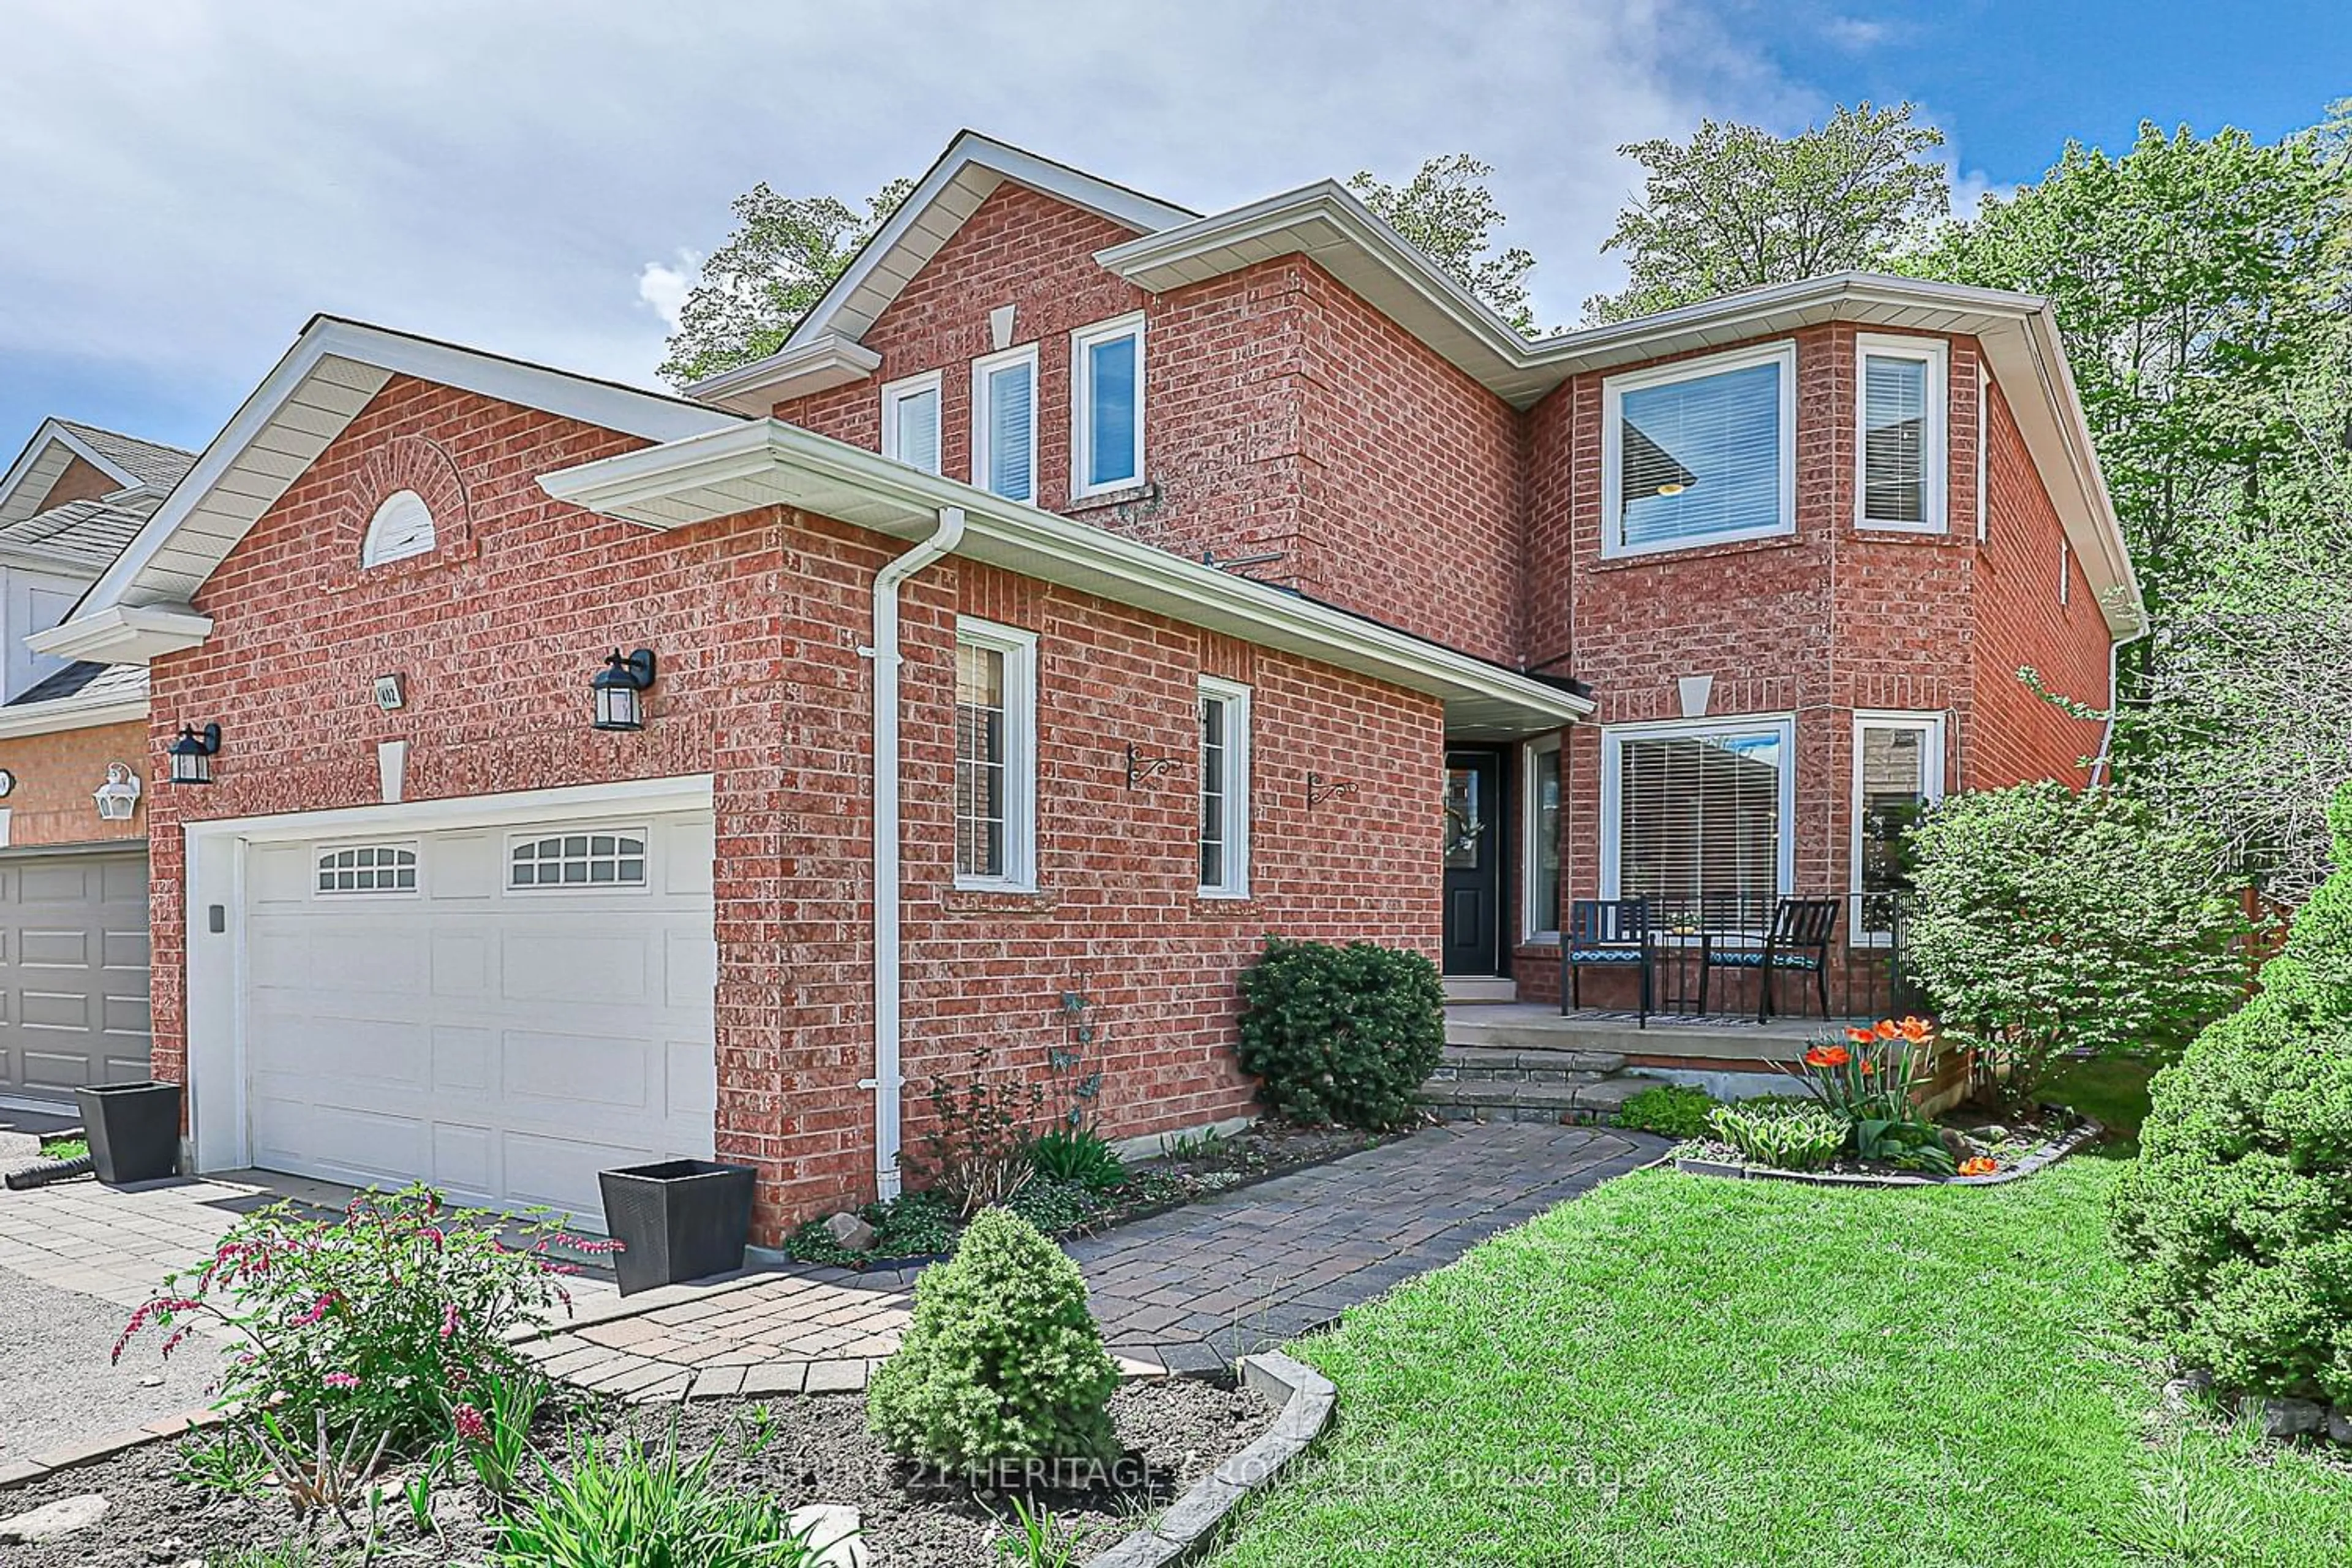 Home with brick exterior material for 402 Carruthers Ave, Newmarket Ontario L3X 2C1